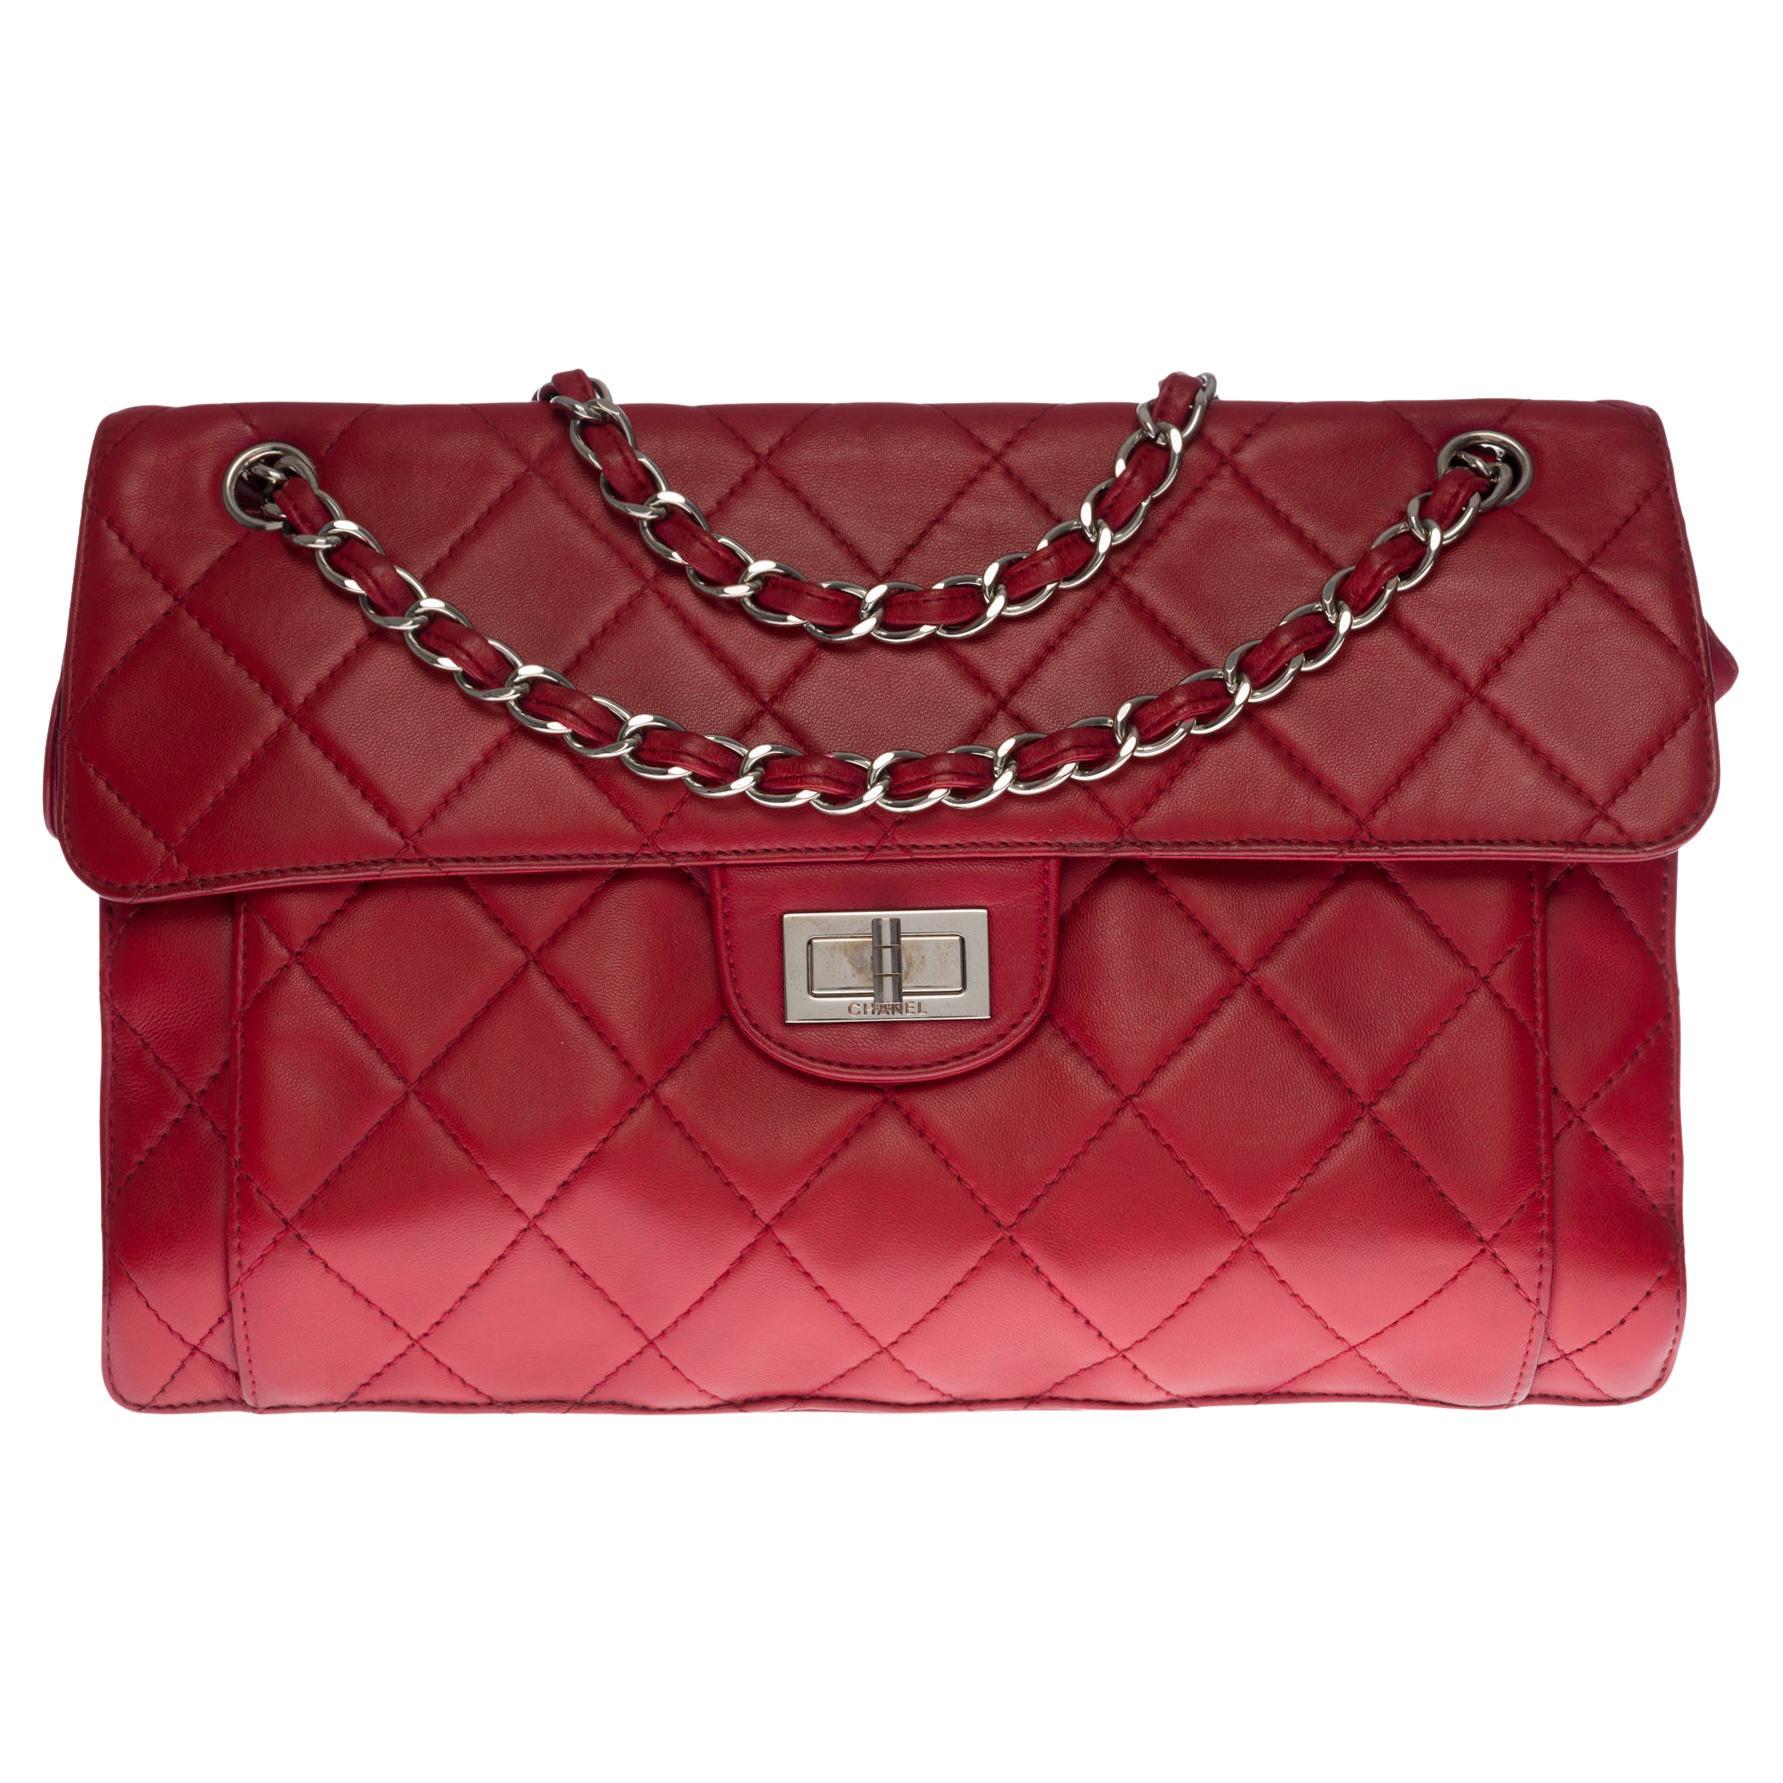 Chanel Classic 2.55 Maxi shoulder bag in red quilted leather, SHW For Sale